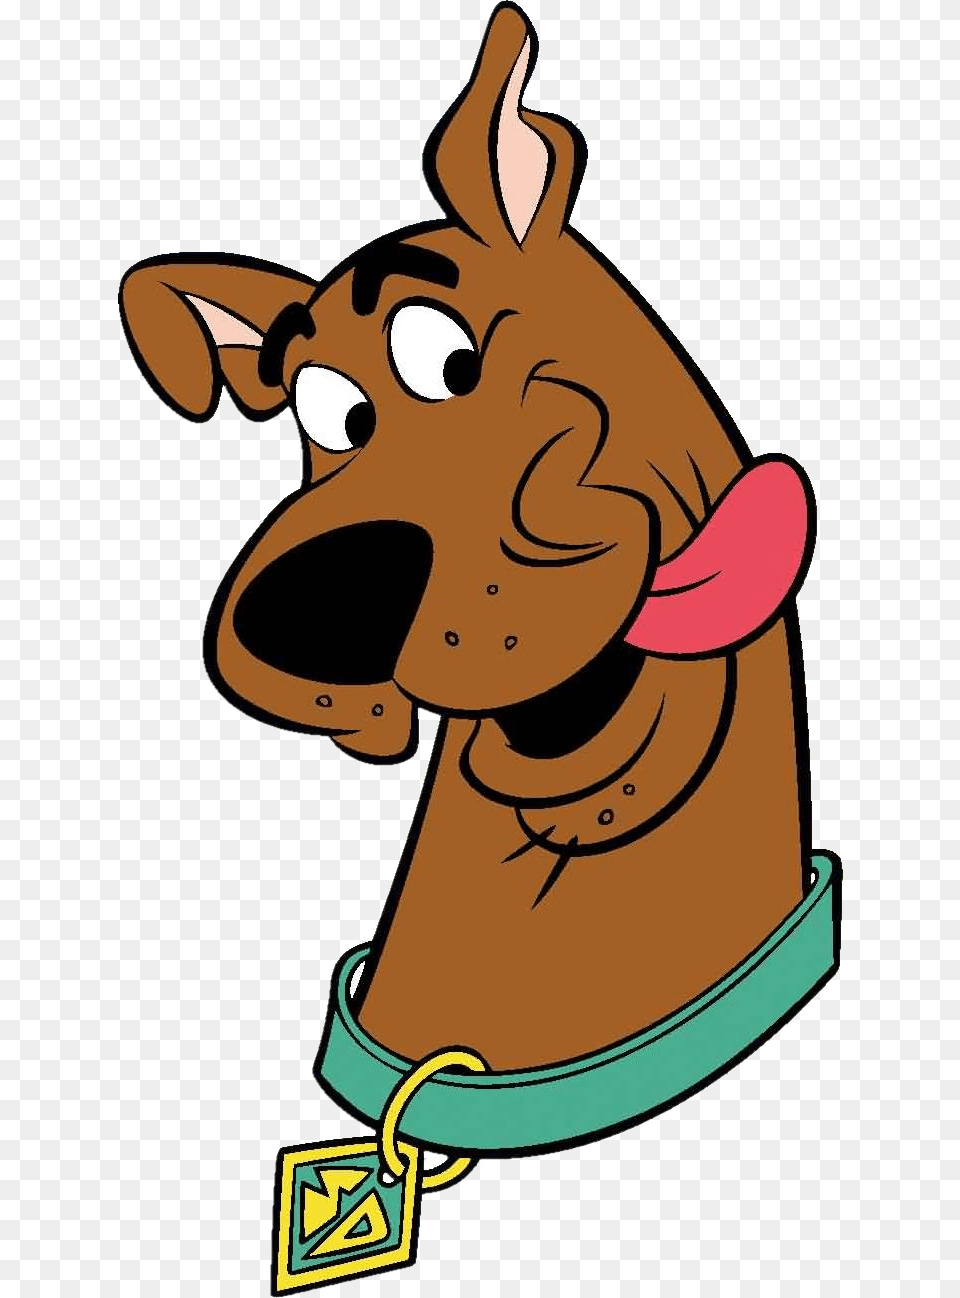 Scooby Doo Clipart Best On Cartoon Characters Scooby Doo, Baby, Person, Face, Head Free Transparent Png